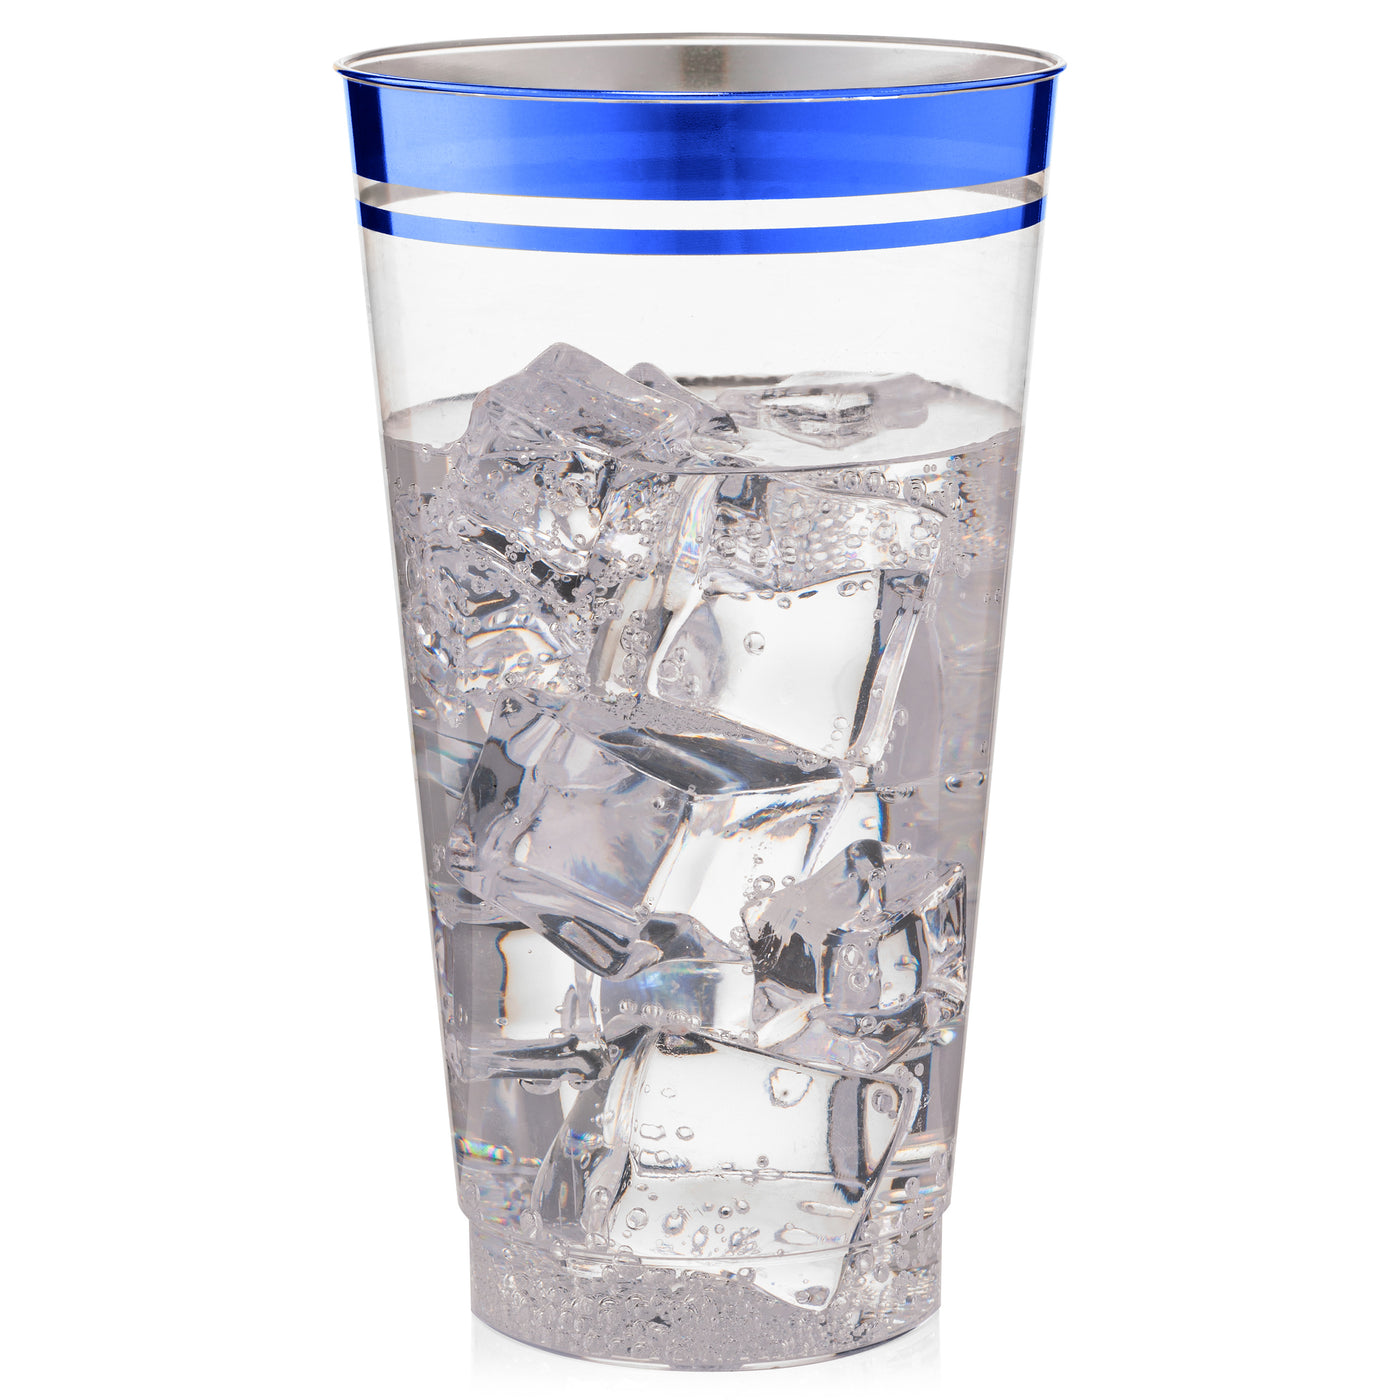 Disposable Plastic Cups, Royal Blue Colored Plastic Cups, 18-Ounce